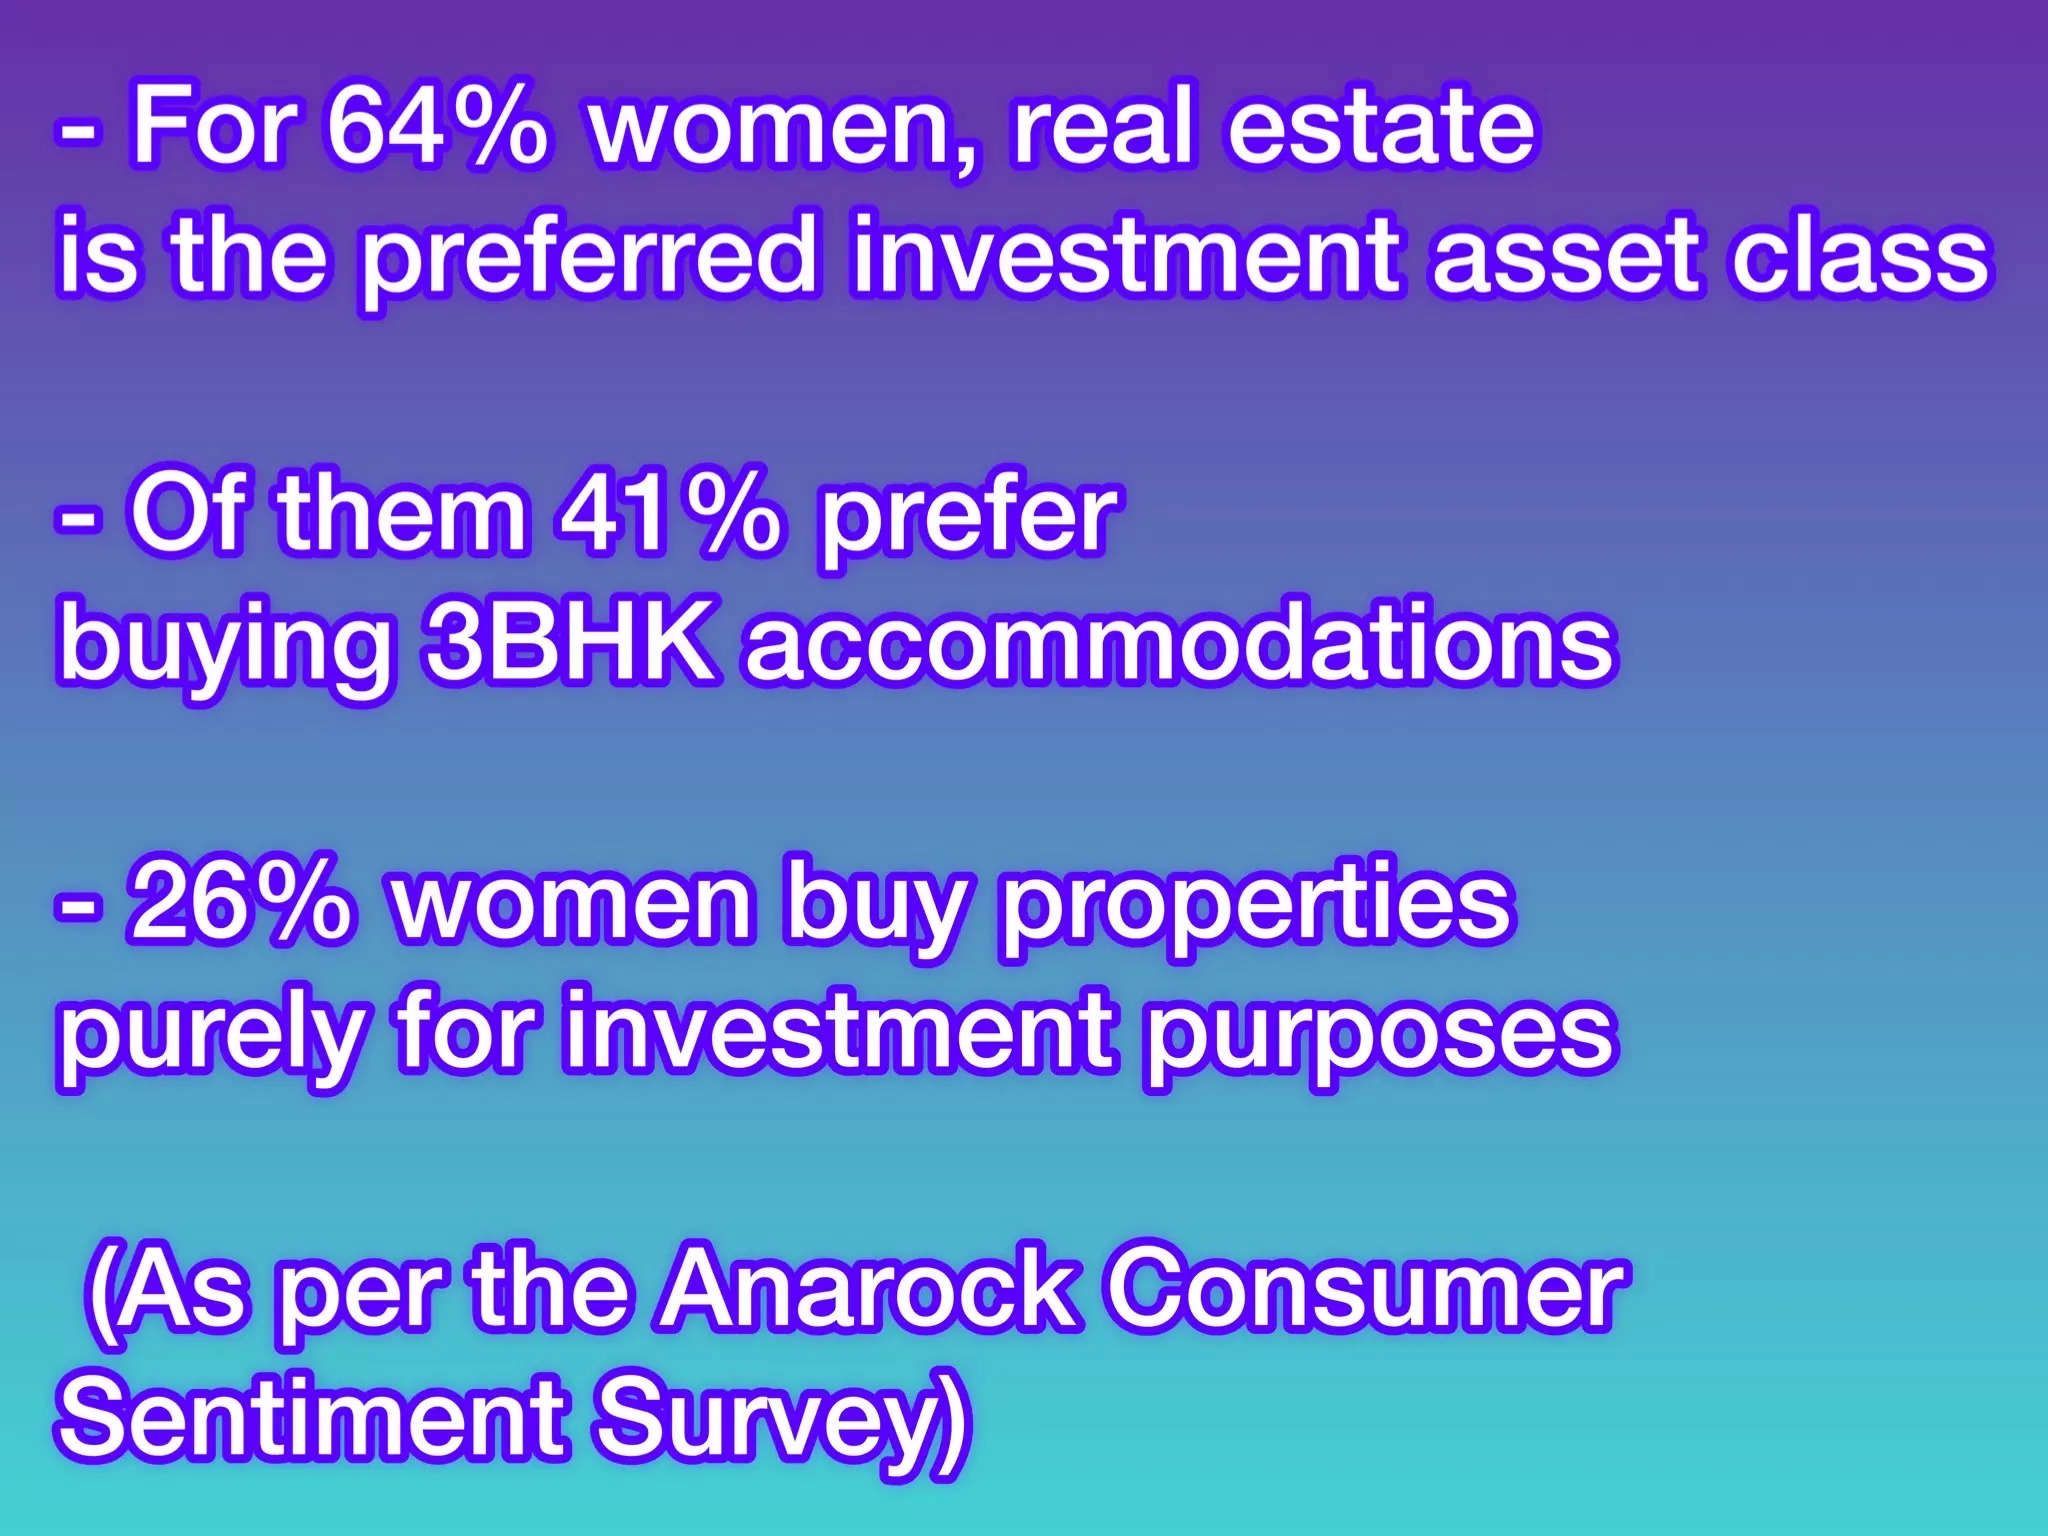 There is also an increase in women investing in real estate for long term returns